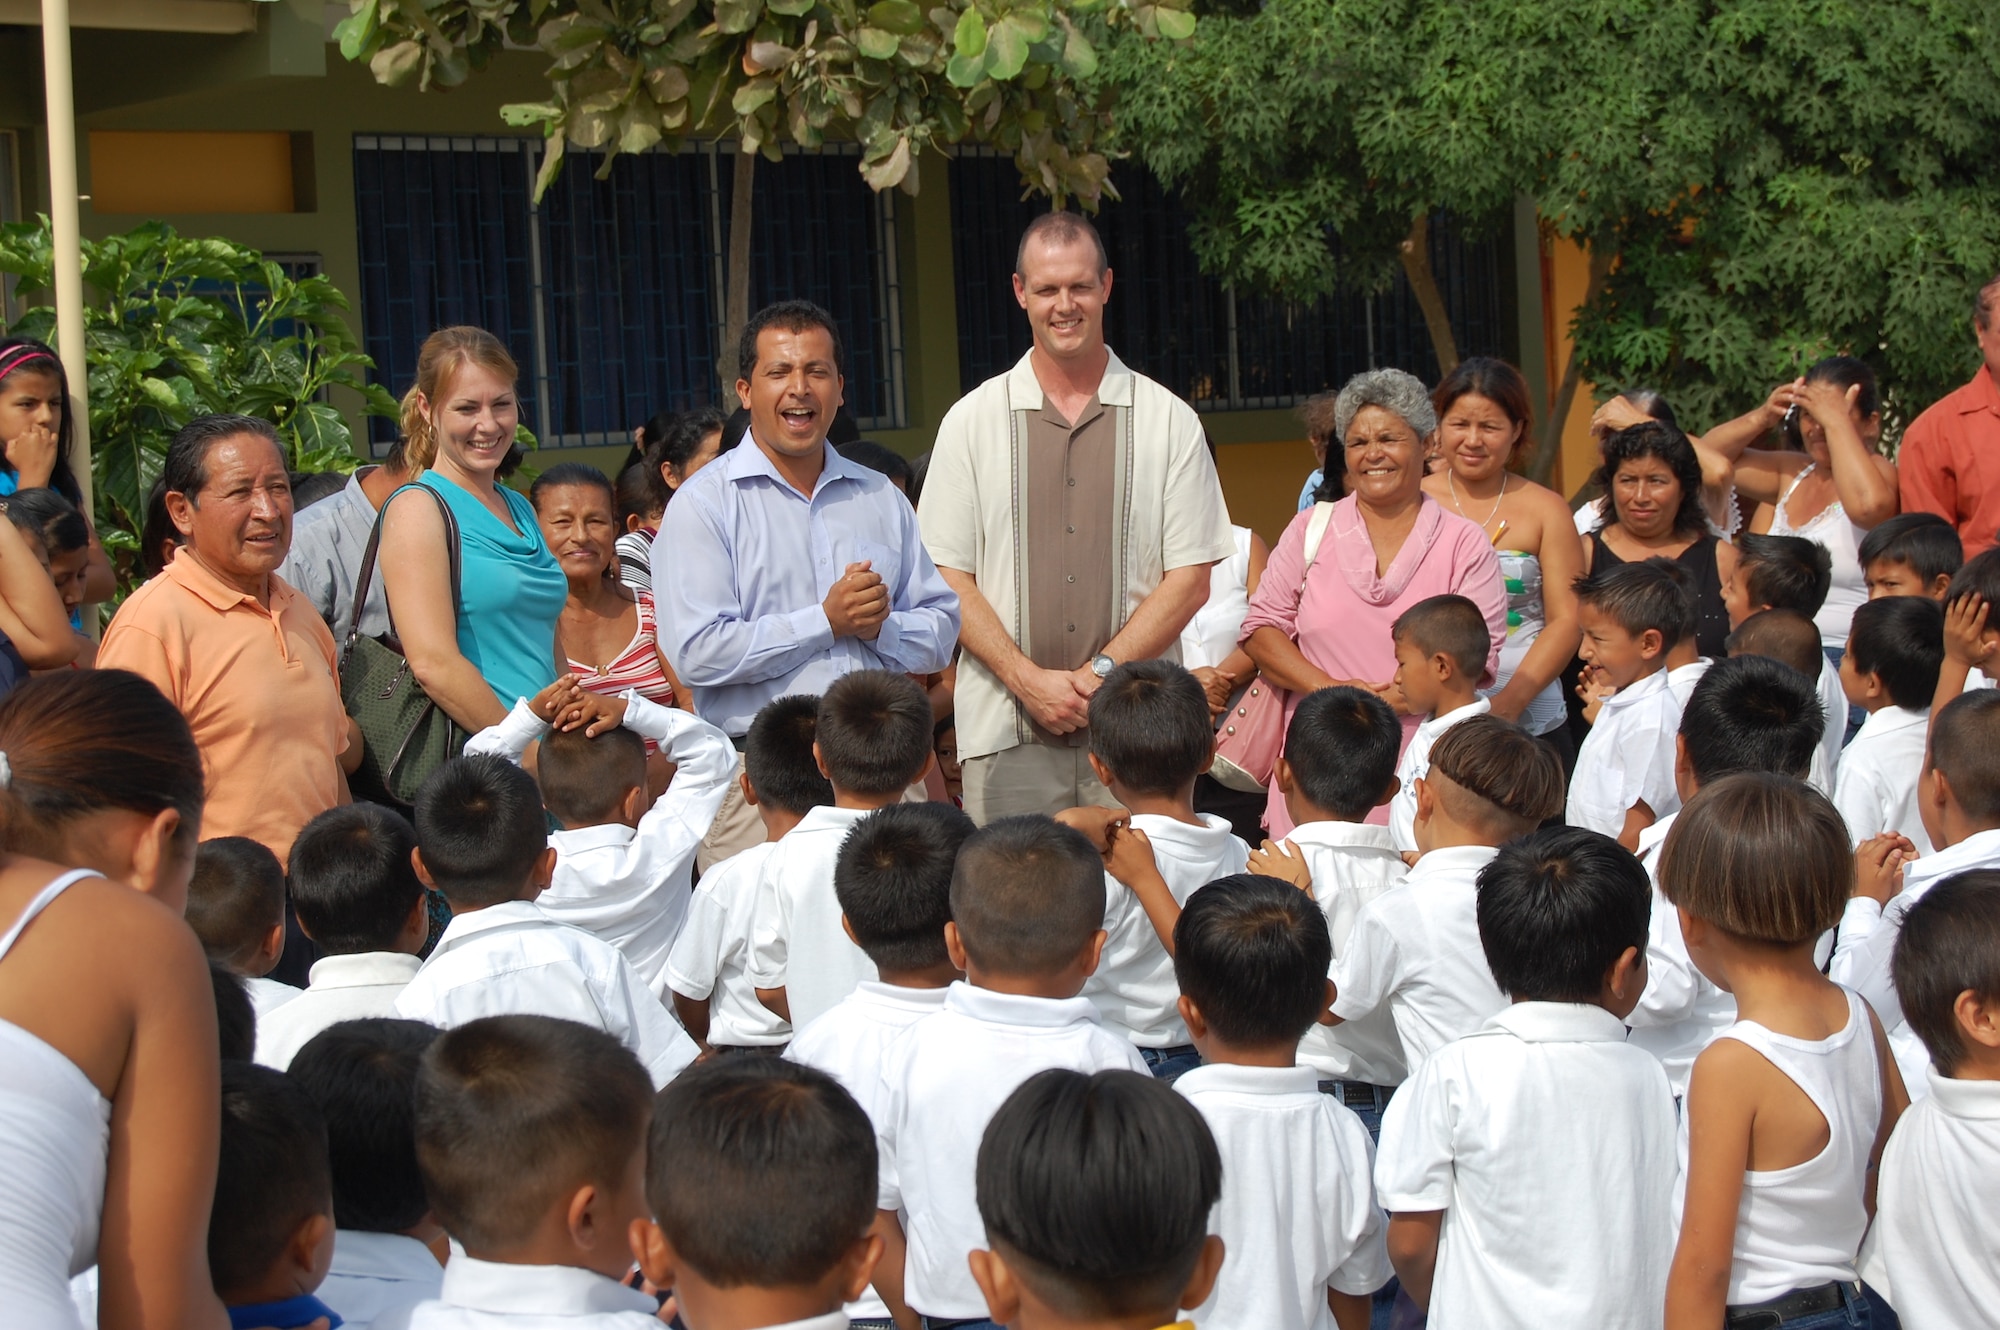 478th EOS Commander, Lt. Col. Jared Curtis, addresses a group of students during a donation delivery to Manta, Ecuador's San Juan Elementary and High Schools April 2. Over 500 children, many of whose families work in the city’s landfill, will benefit from the $5,400-worth of materials donated through U.S. Southern Command’s Humanitarian Assistance Program. (U.S. Air Force photo by 1st Lt. Beth Woodward)
     
